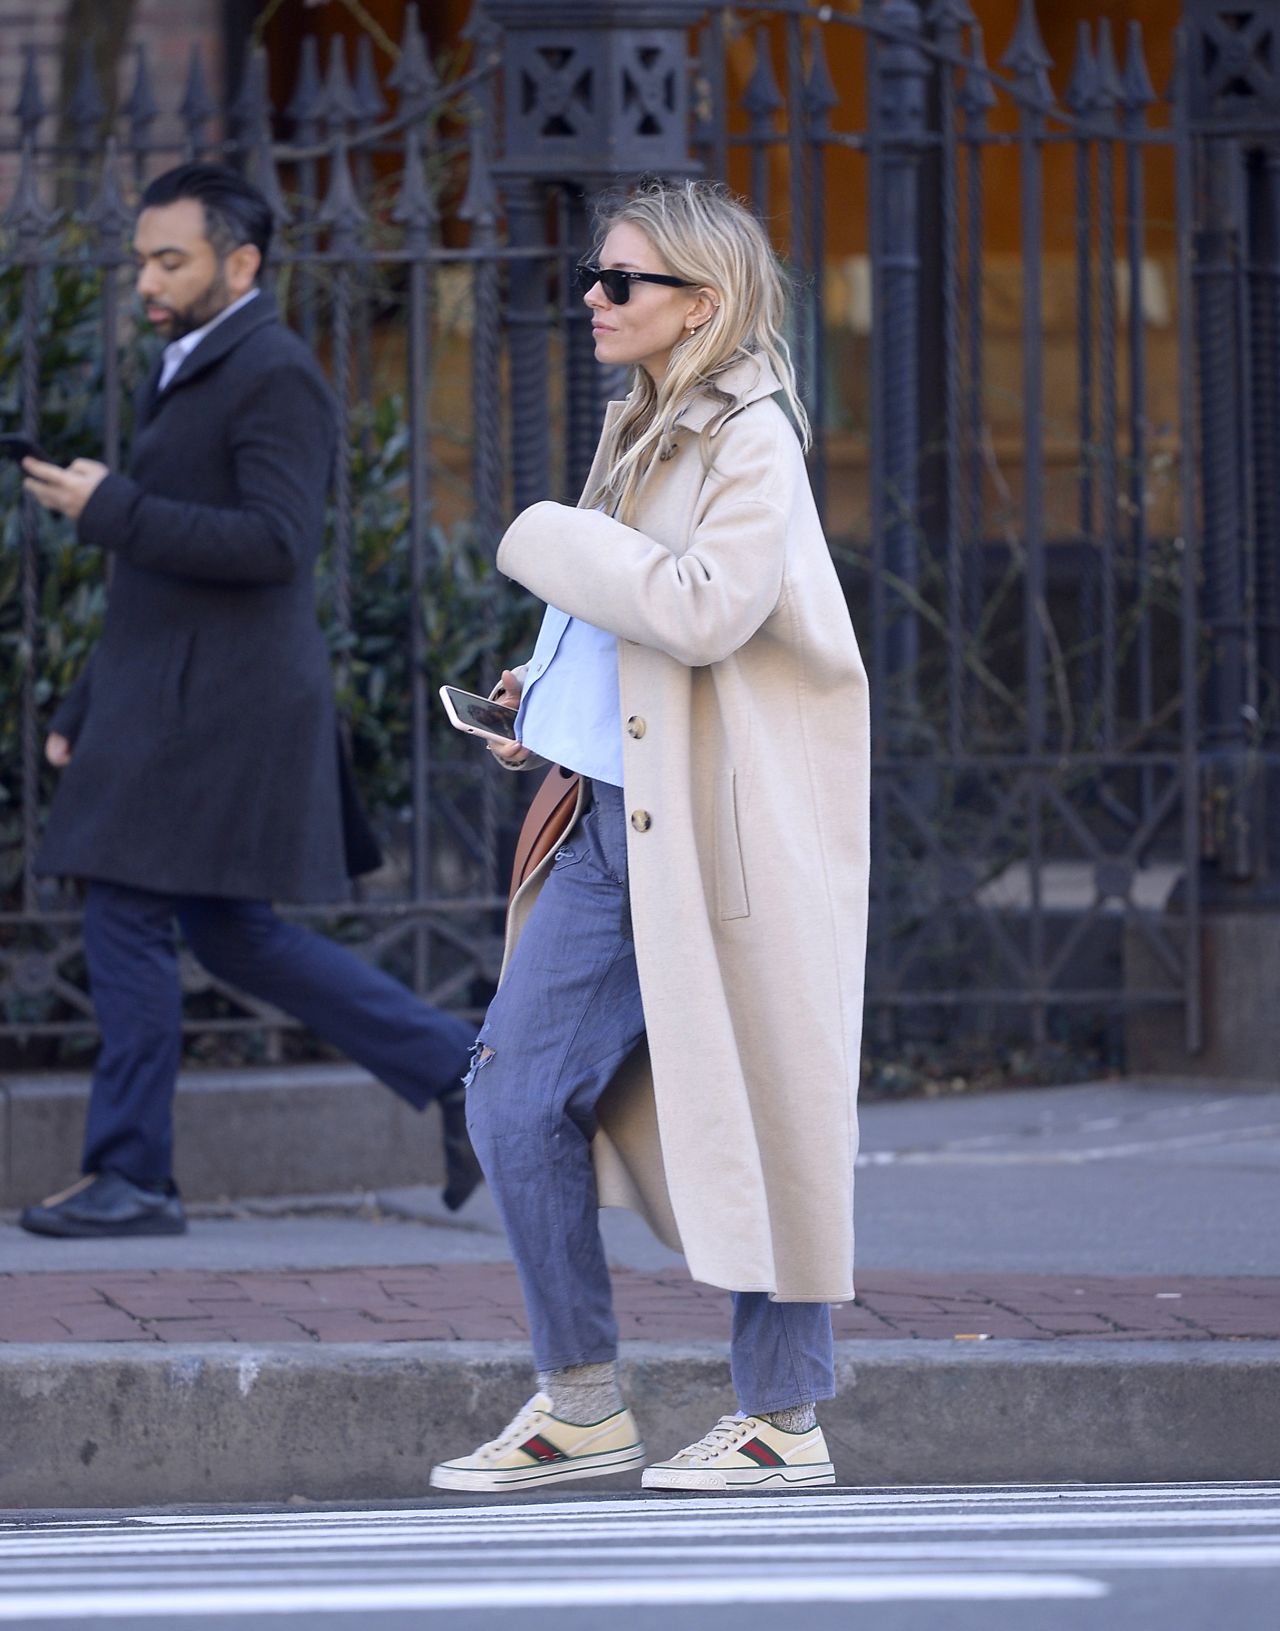 Sienna Miller in Casual Outfit - New York City 02/19/2020 • CelebMafia